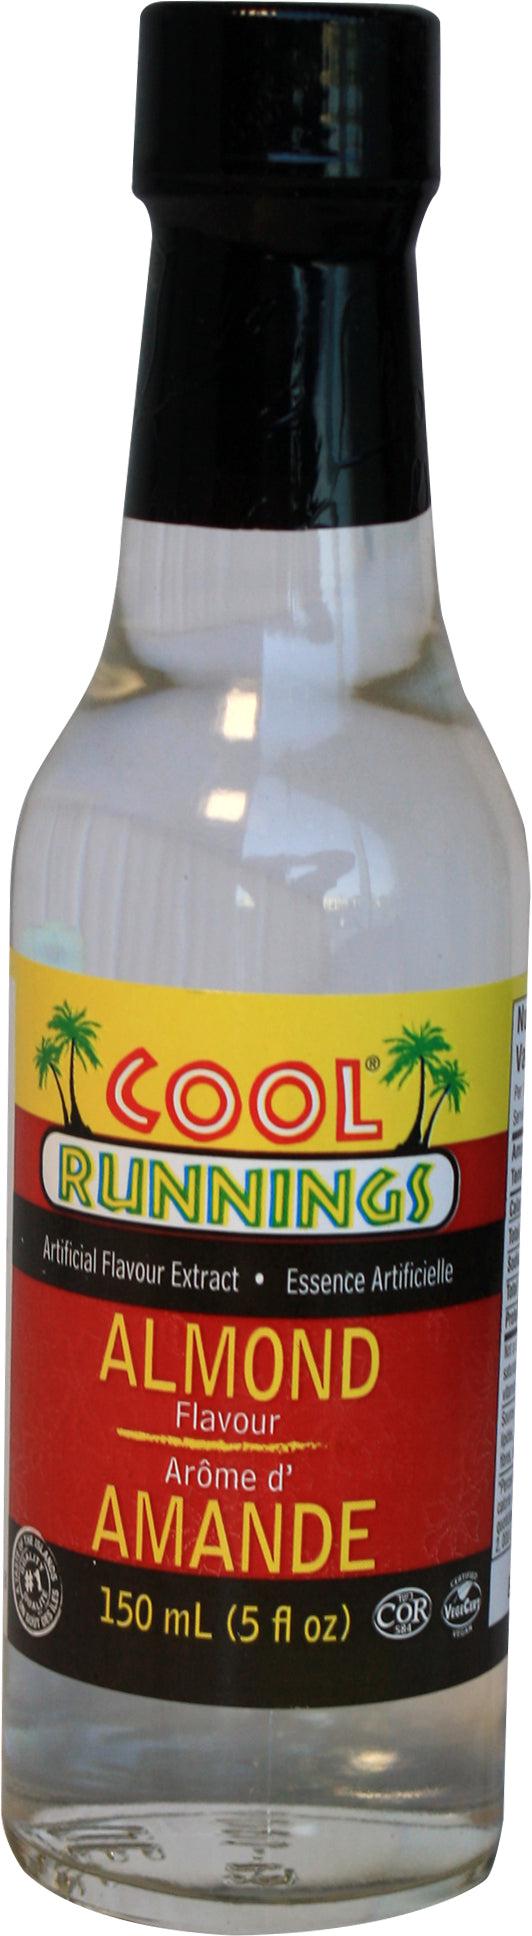 Cool Runnings - Almond Extract